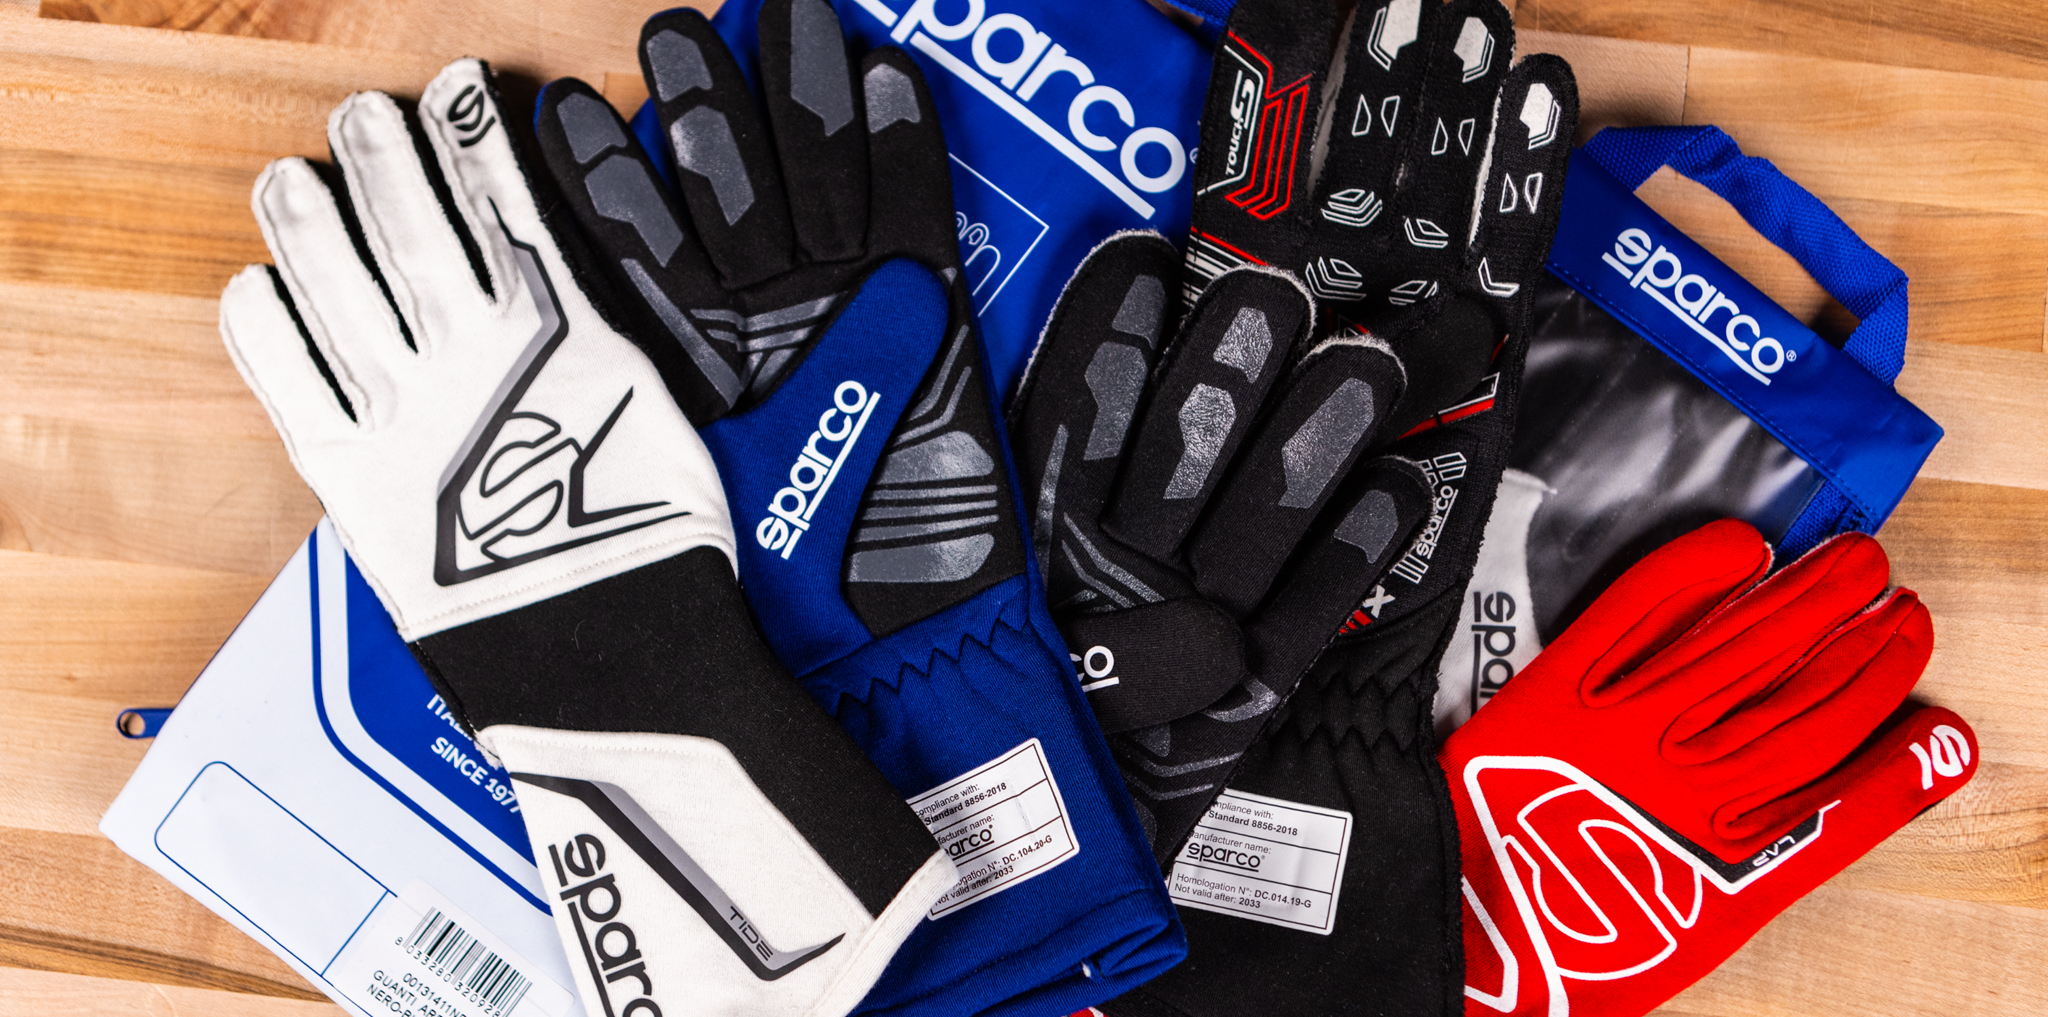 Track Prep: Choosing the Perfect Sparco Gloves for the Racing Season Ahead